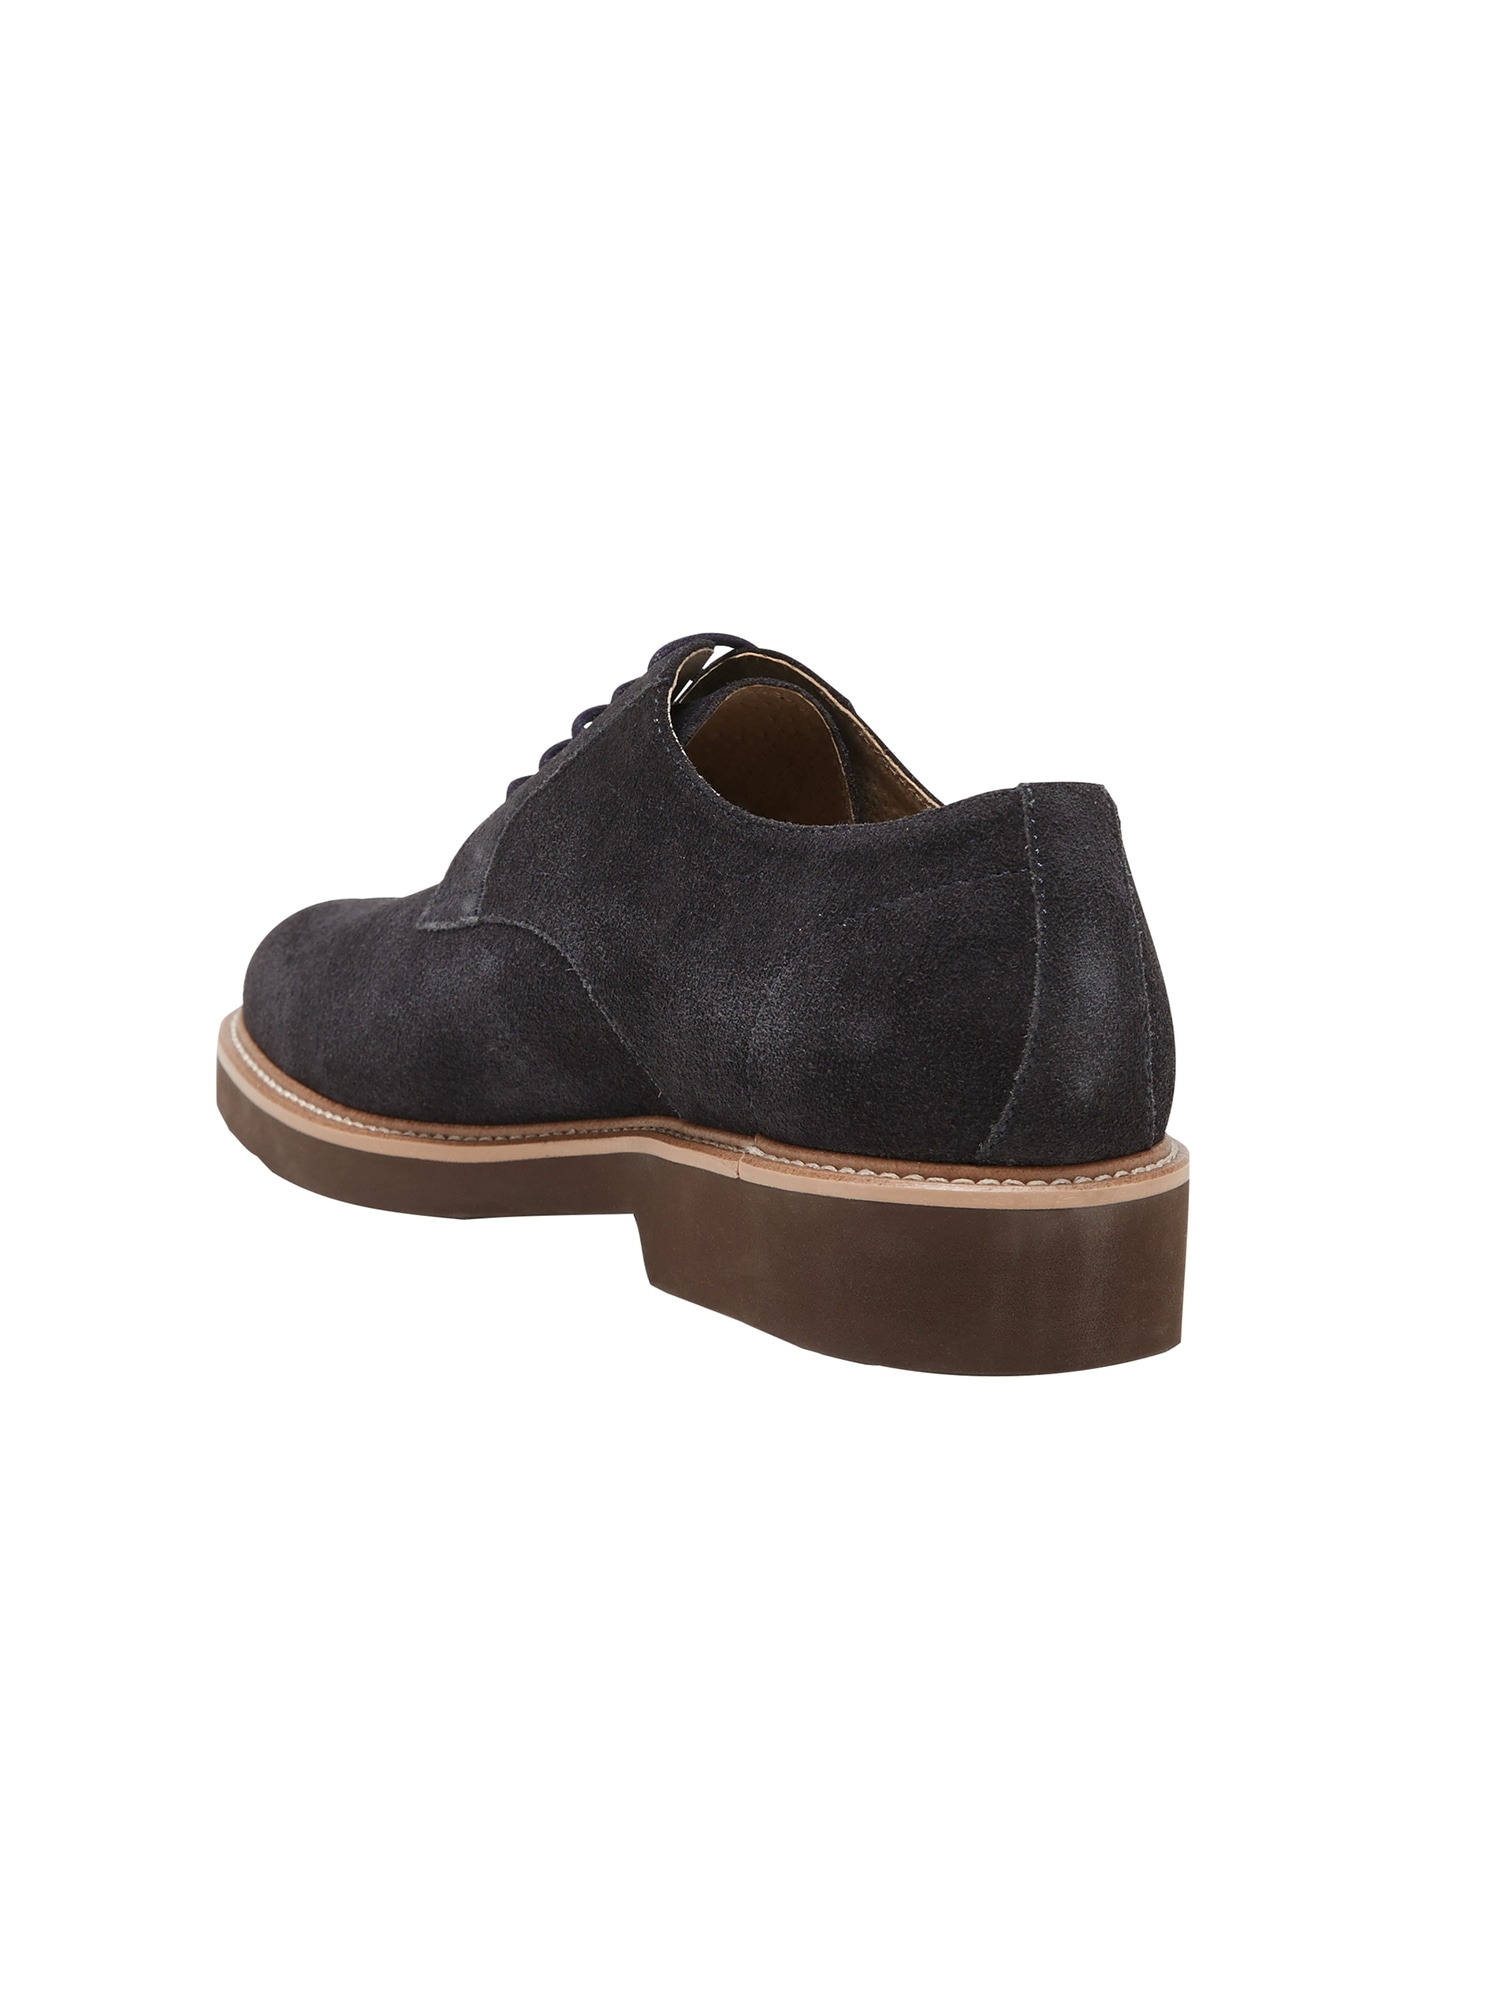 Nyle Suede Lace-Up Oxford